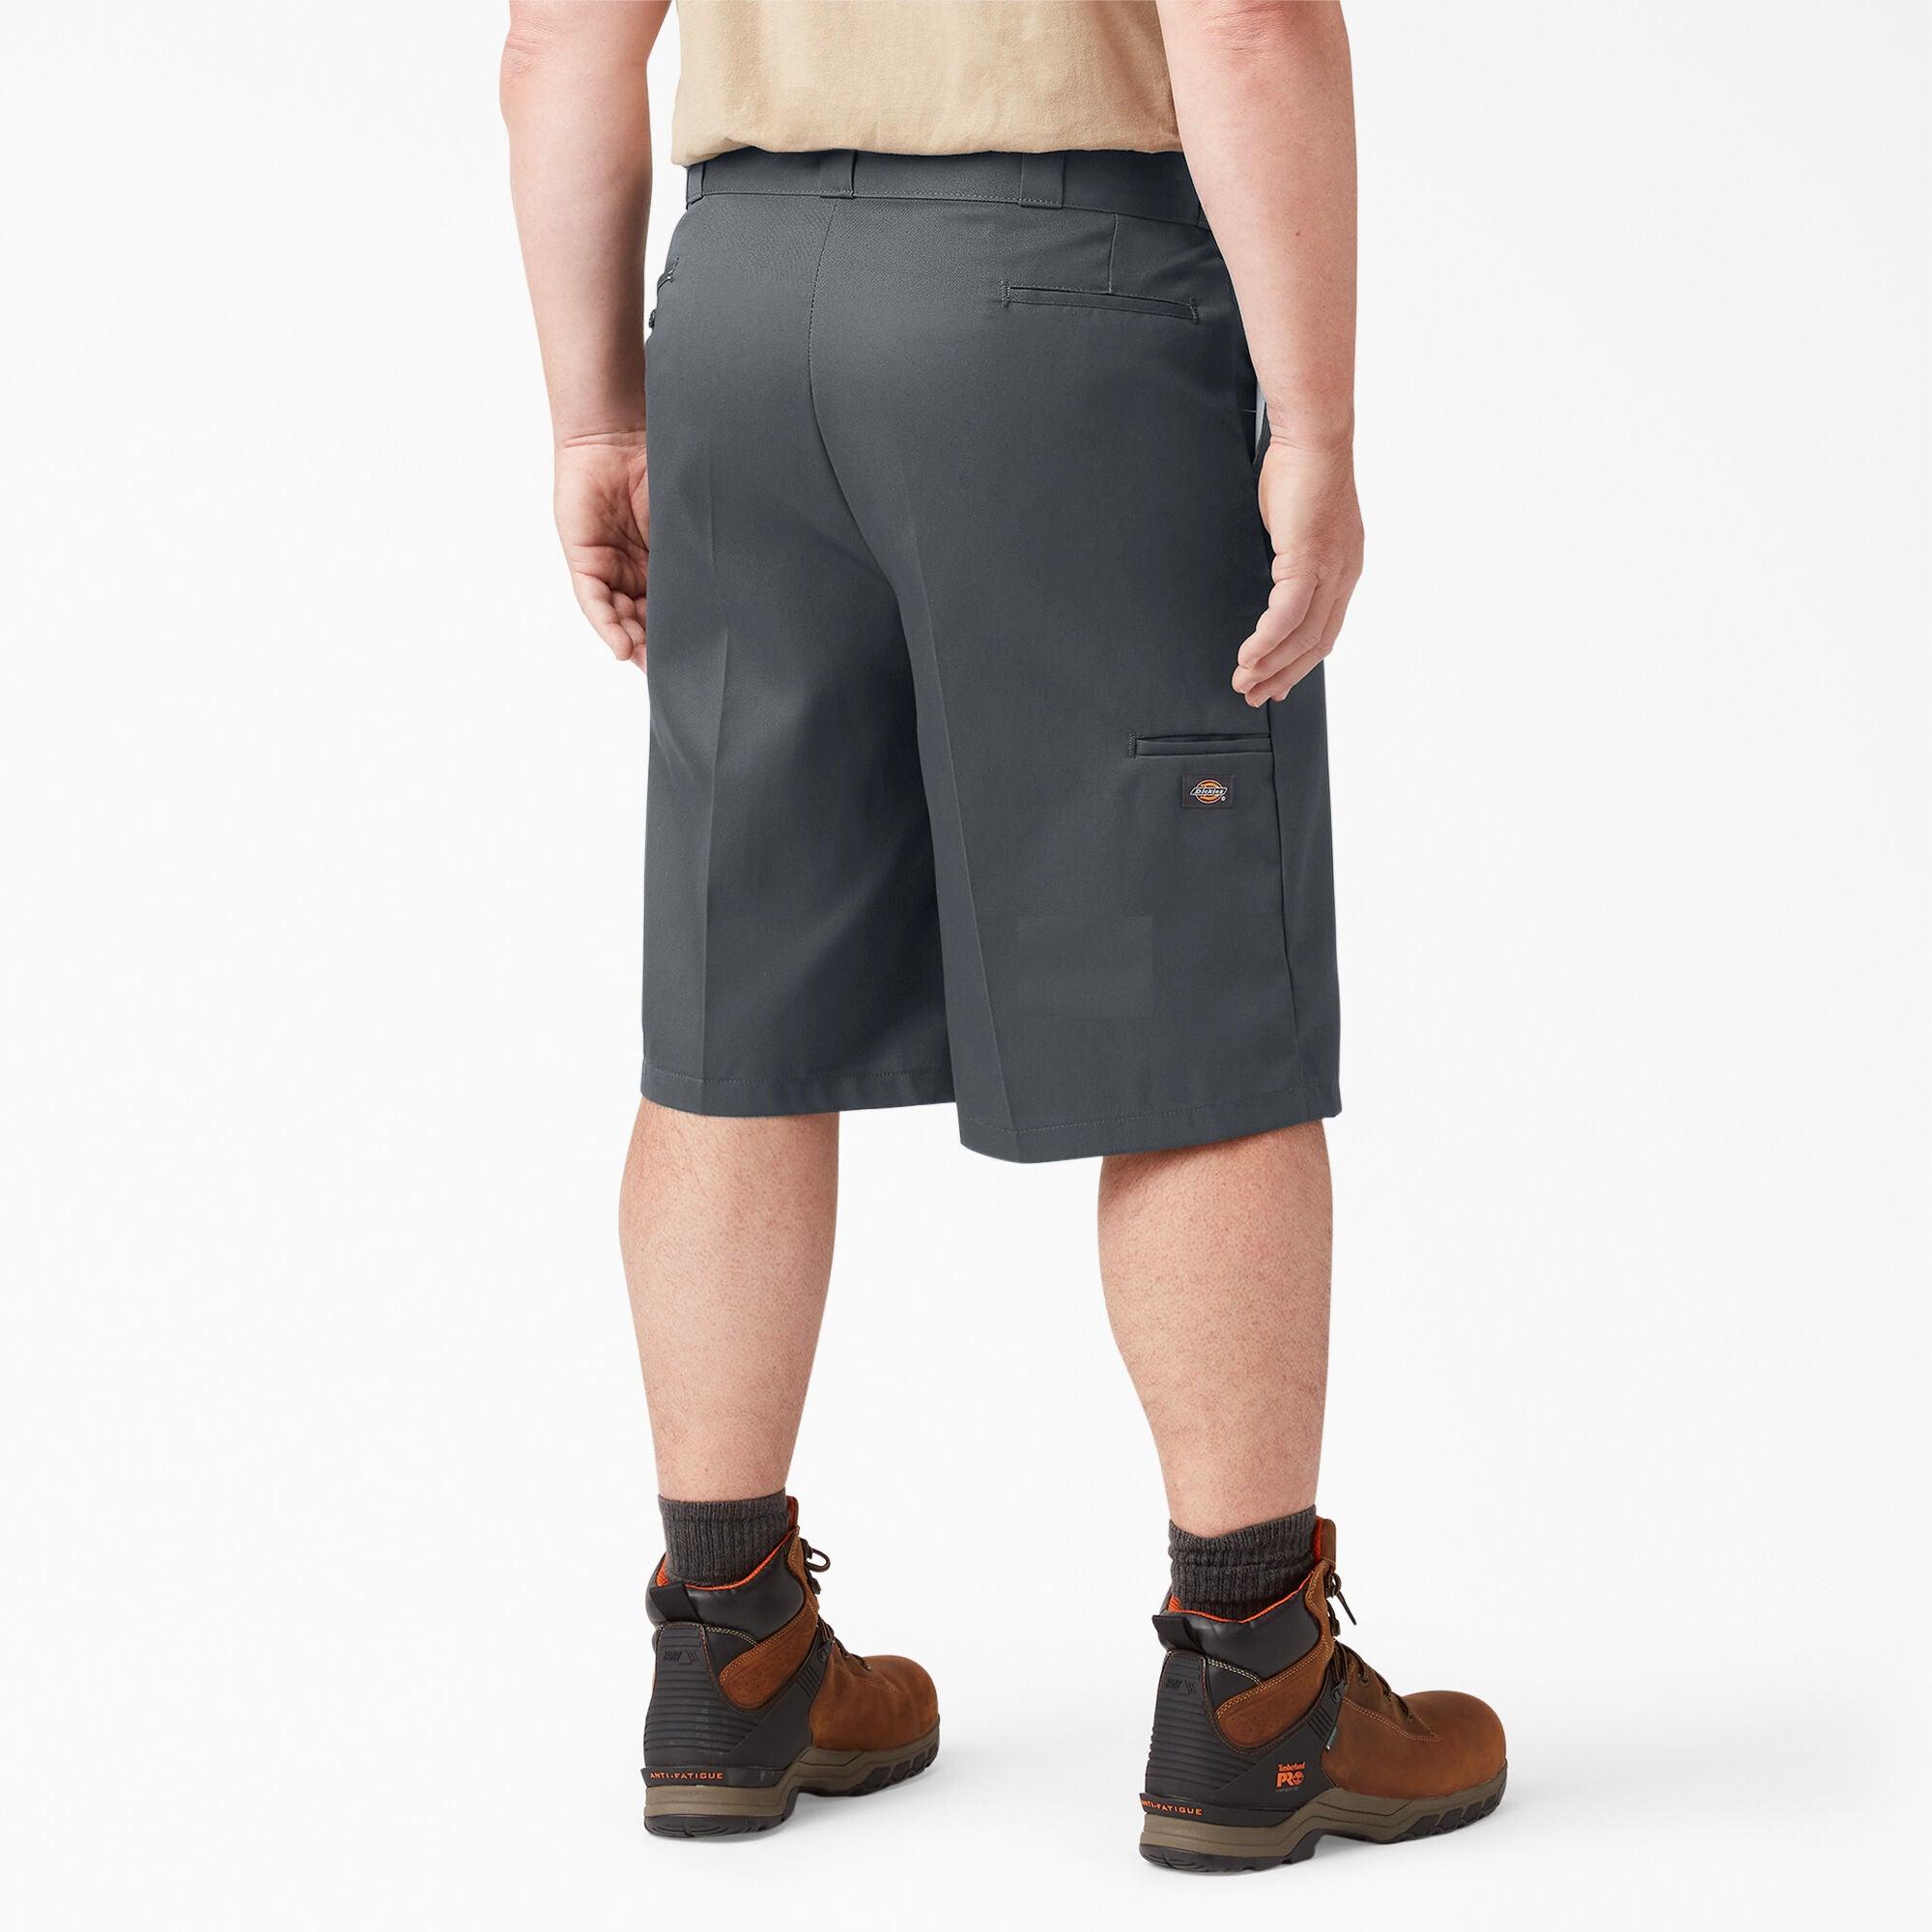 13" Loose Fit Multi-Use Pocket Work Shorts - Charcoal - Purpose-Built / Home of the Trades